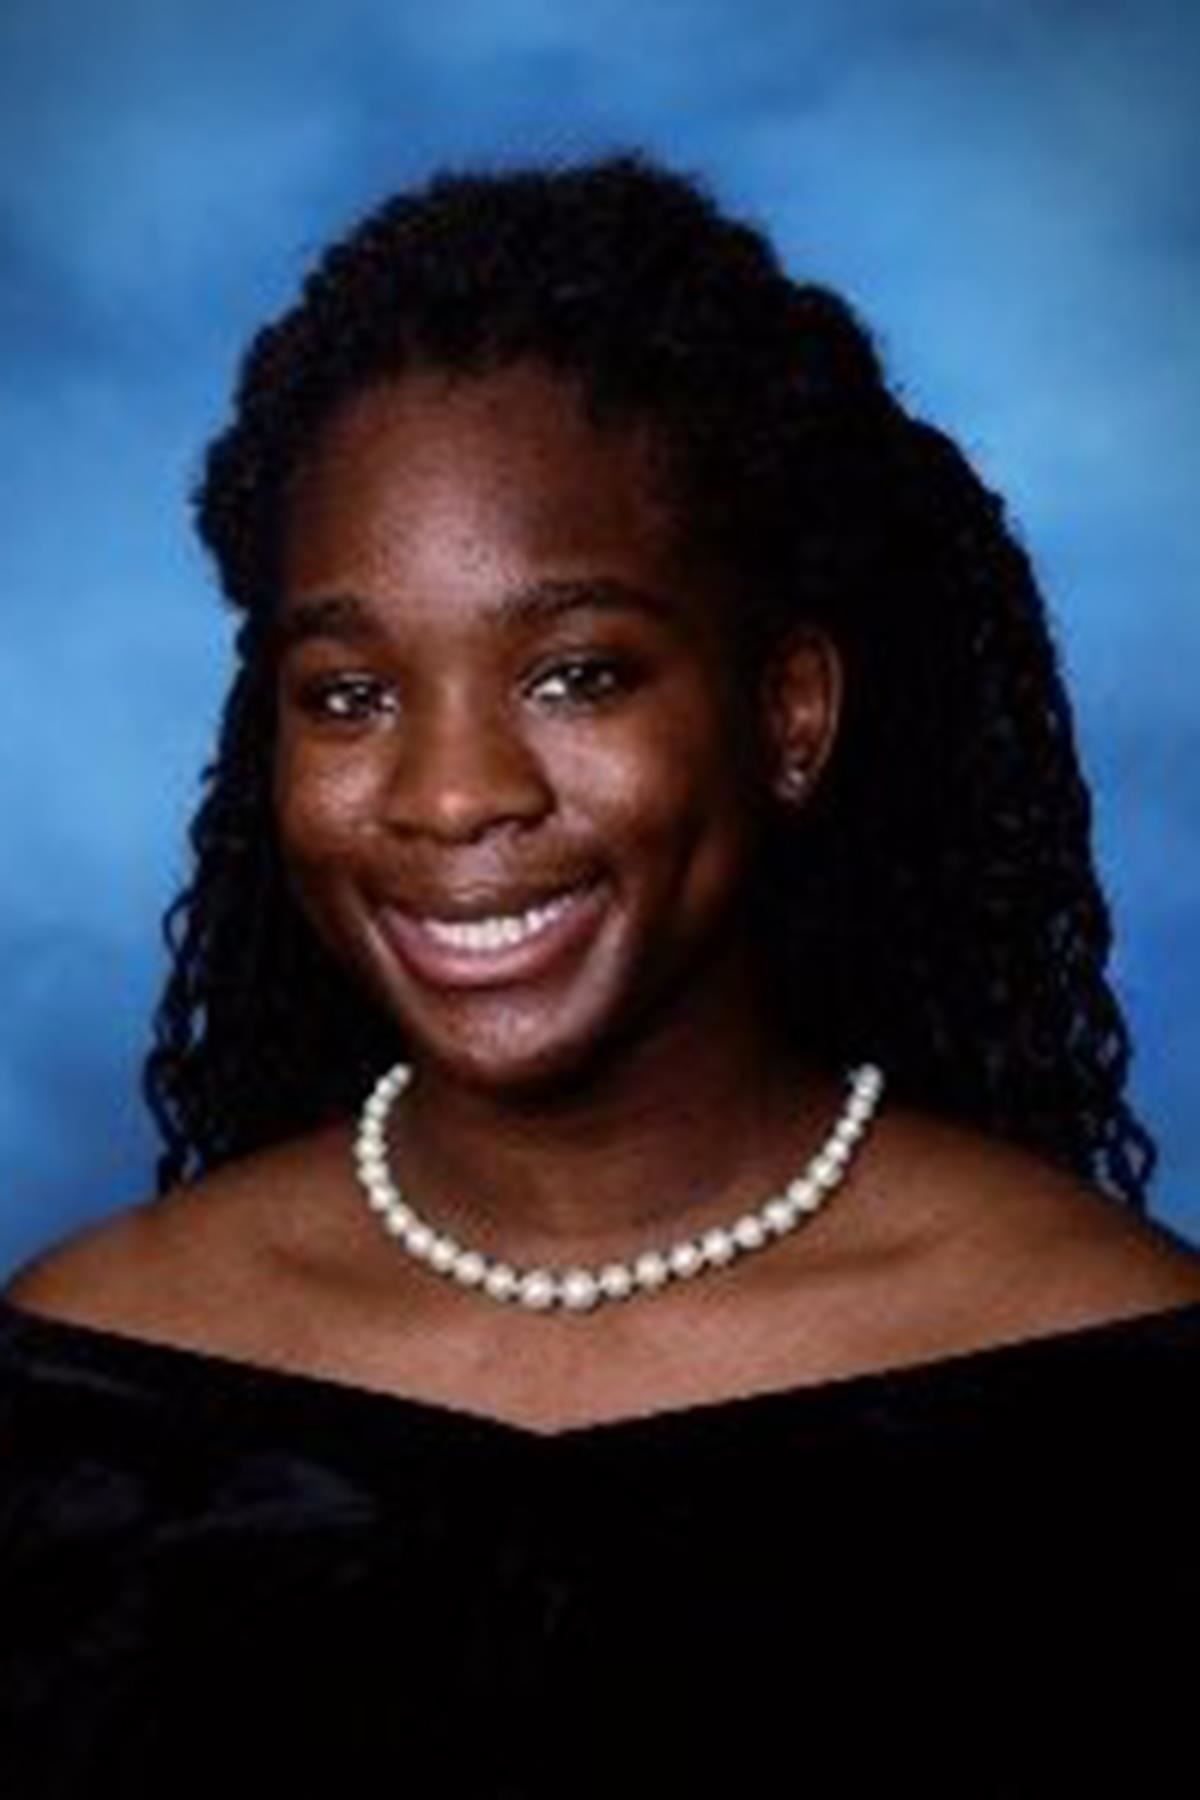 Cypress Lakes High School graduate Onyeka Ozuzu earned acceptance and will attend Dartmouth College in Hanover, N.H.